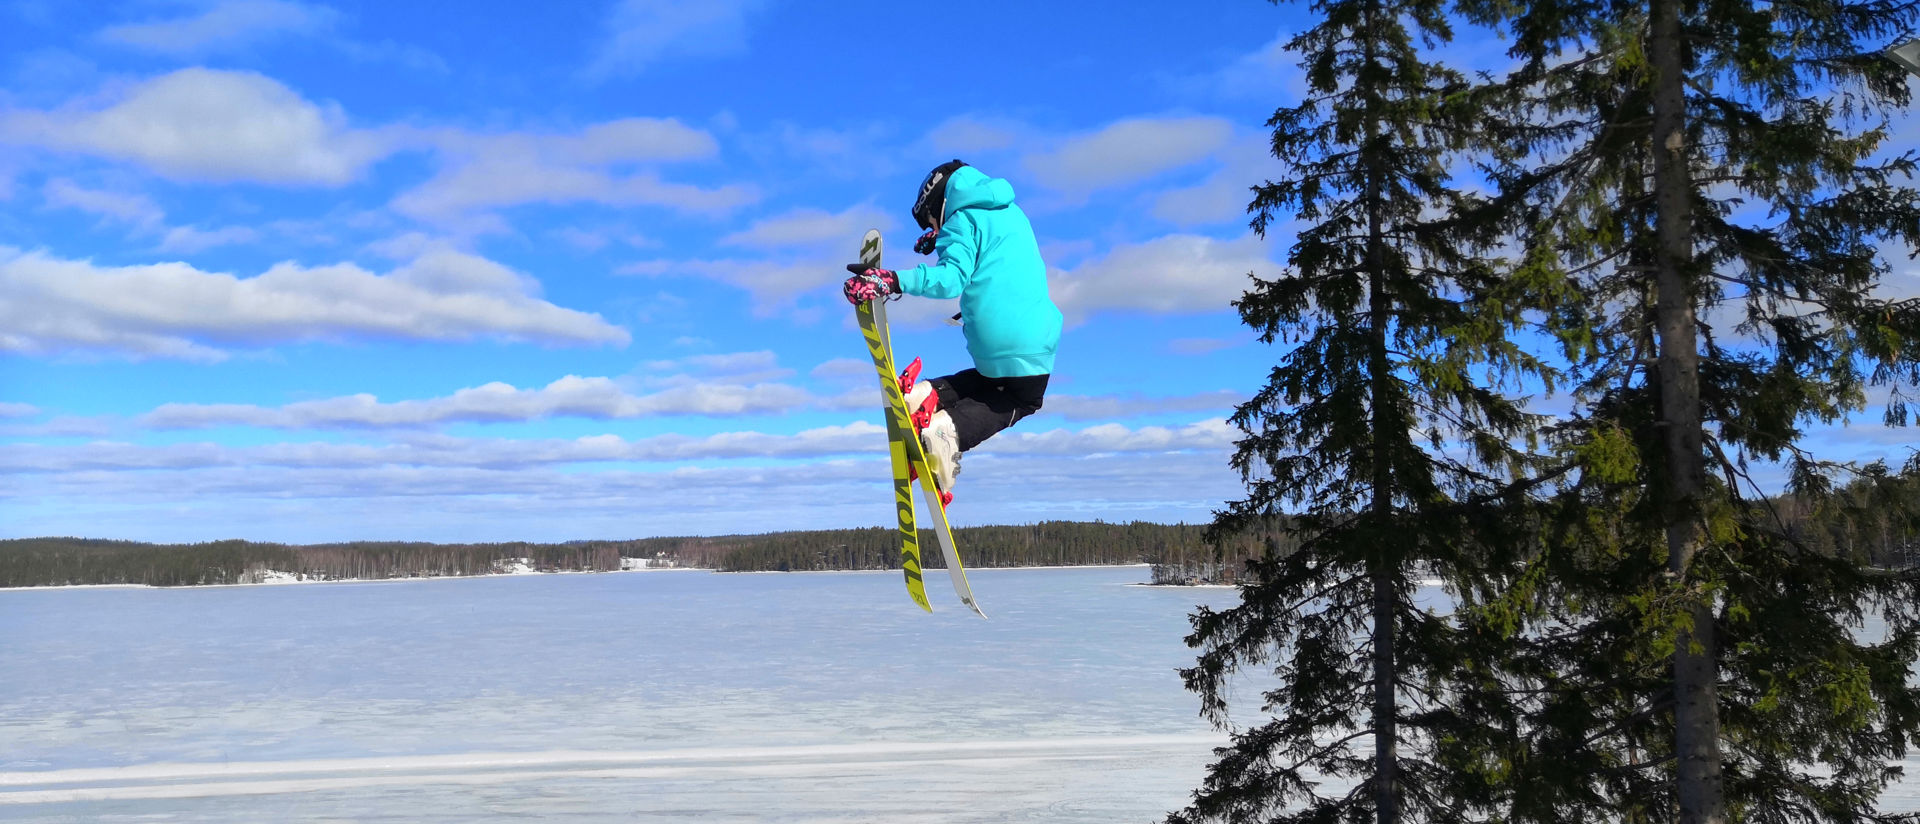 a skier jumping on a slope, with a snowy lake in the background